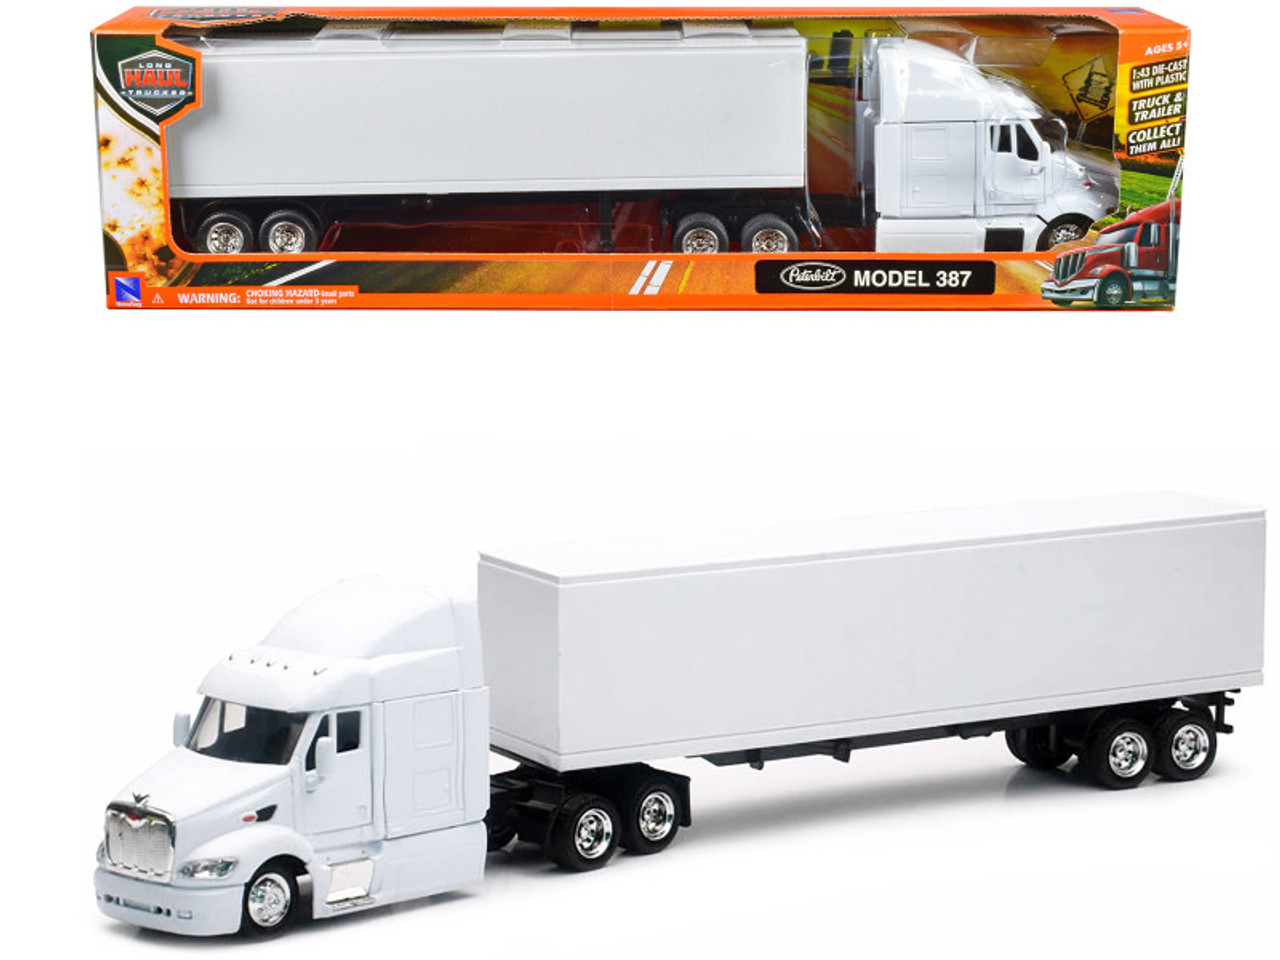 Peterbilt 387 Truck with Dry Goods Trailer White "Long Haul Trucker" Series 1/43 Diecast Model by New Ray $29.84